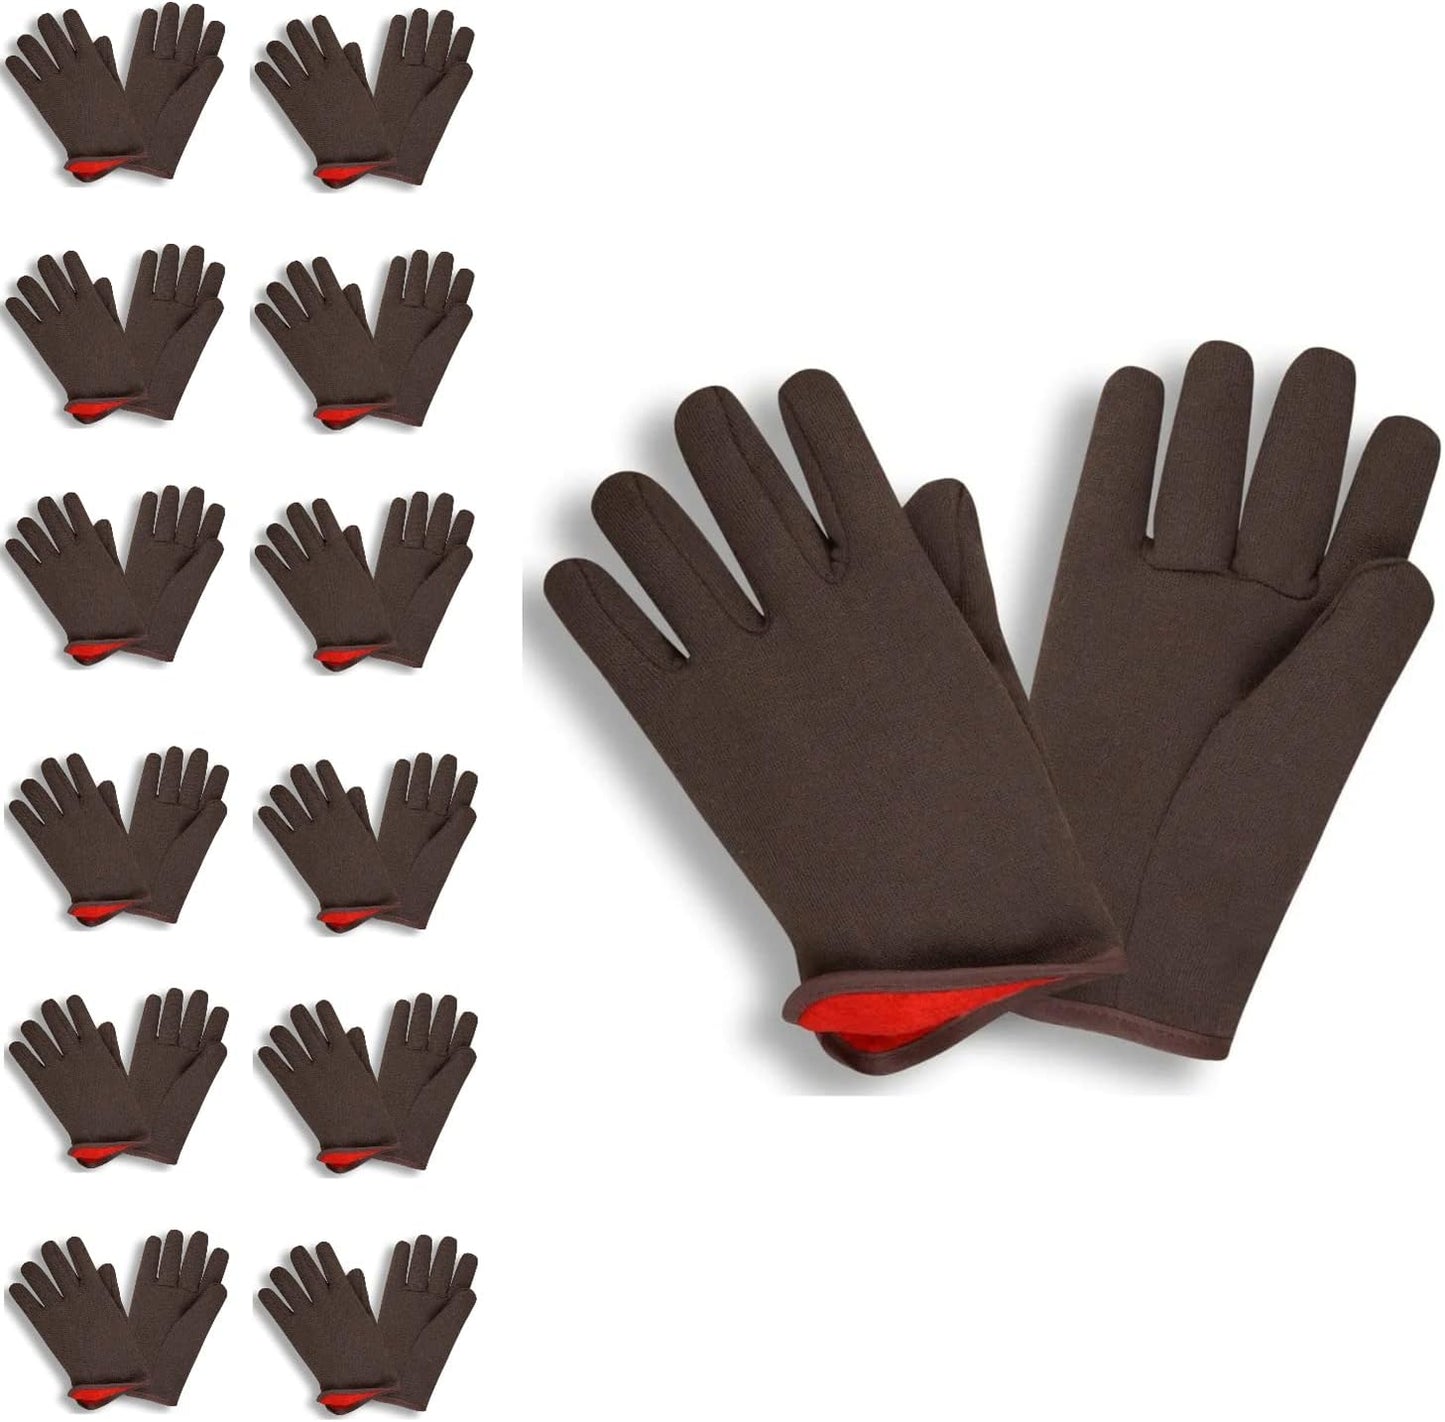 Brown Jersey Cotton Gloves, 12-Pack